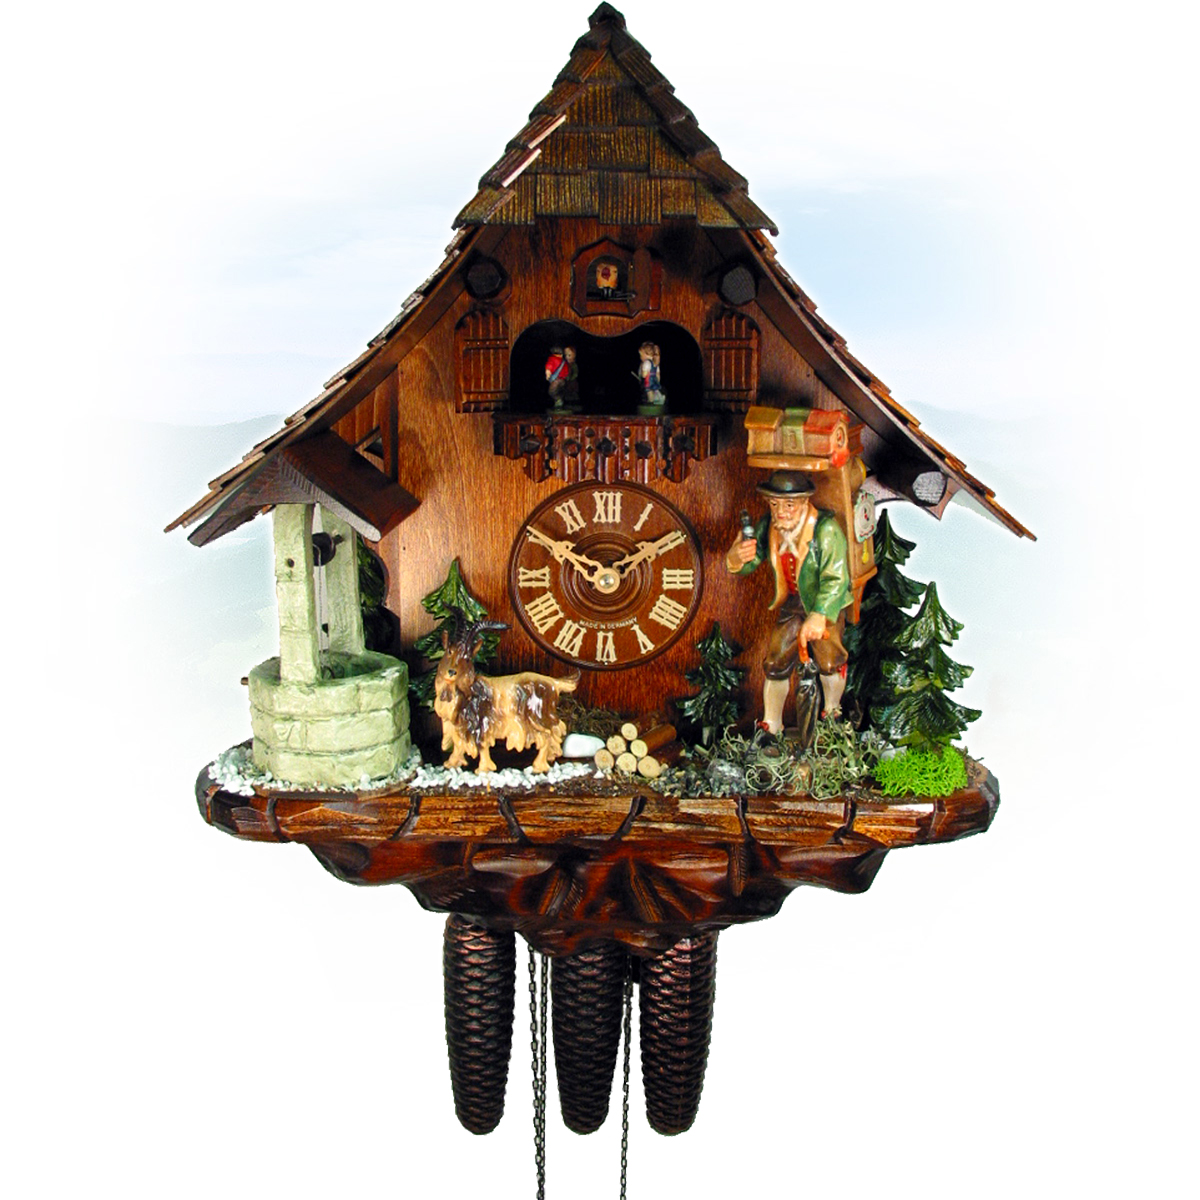 Preview: Cuckoo Clock Vicenza, August Schwer: pitched roof, clock peddler.